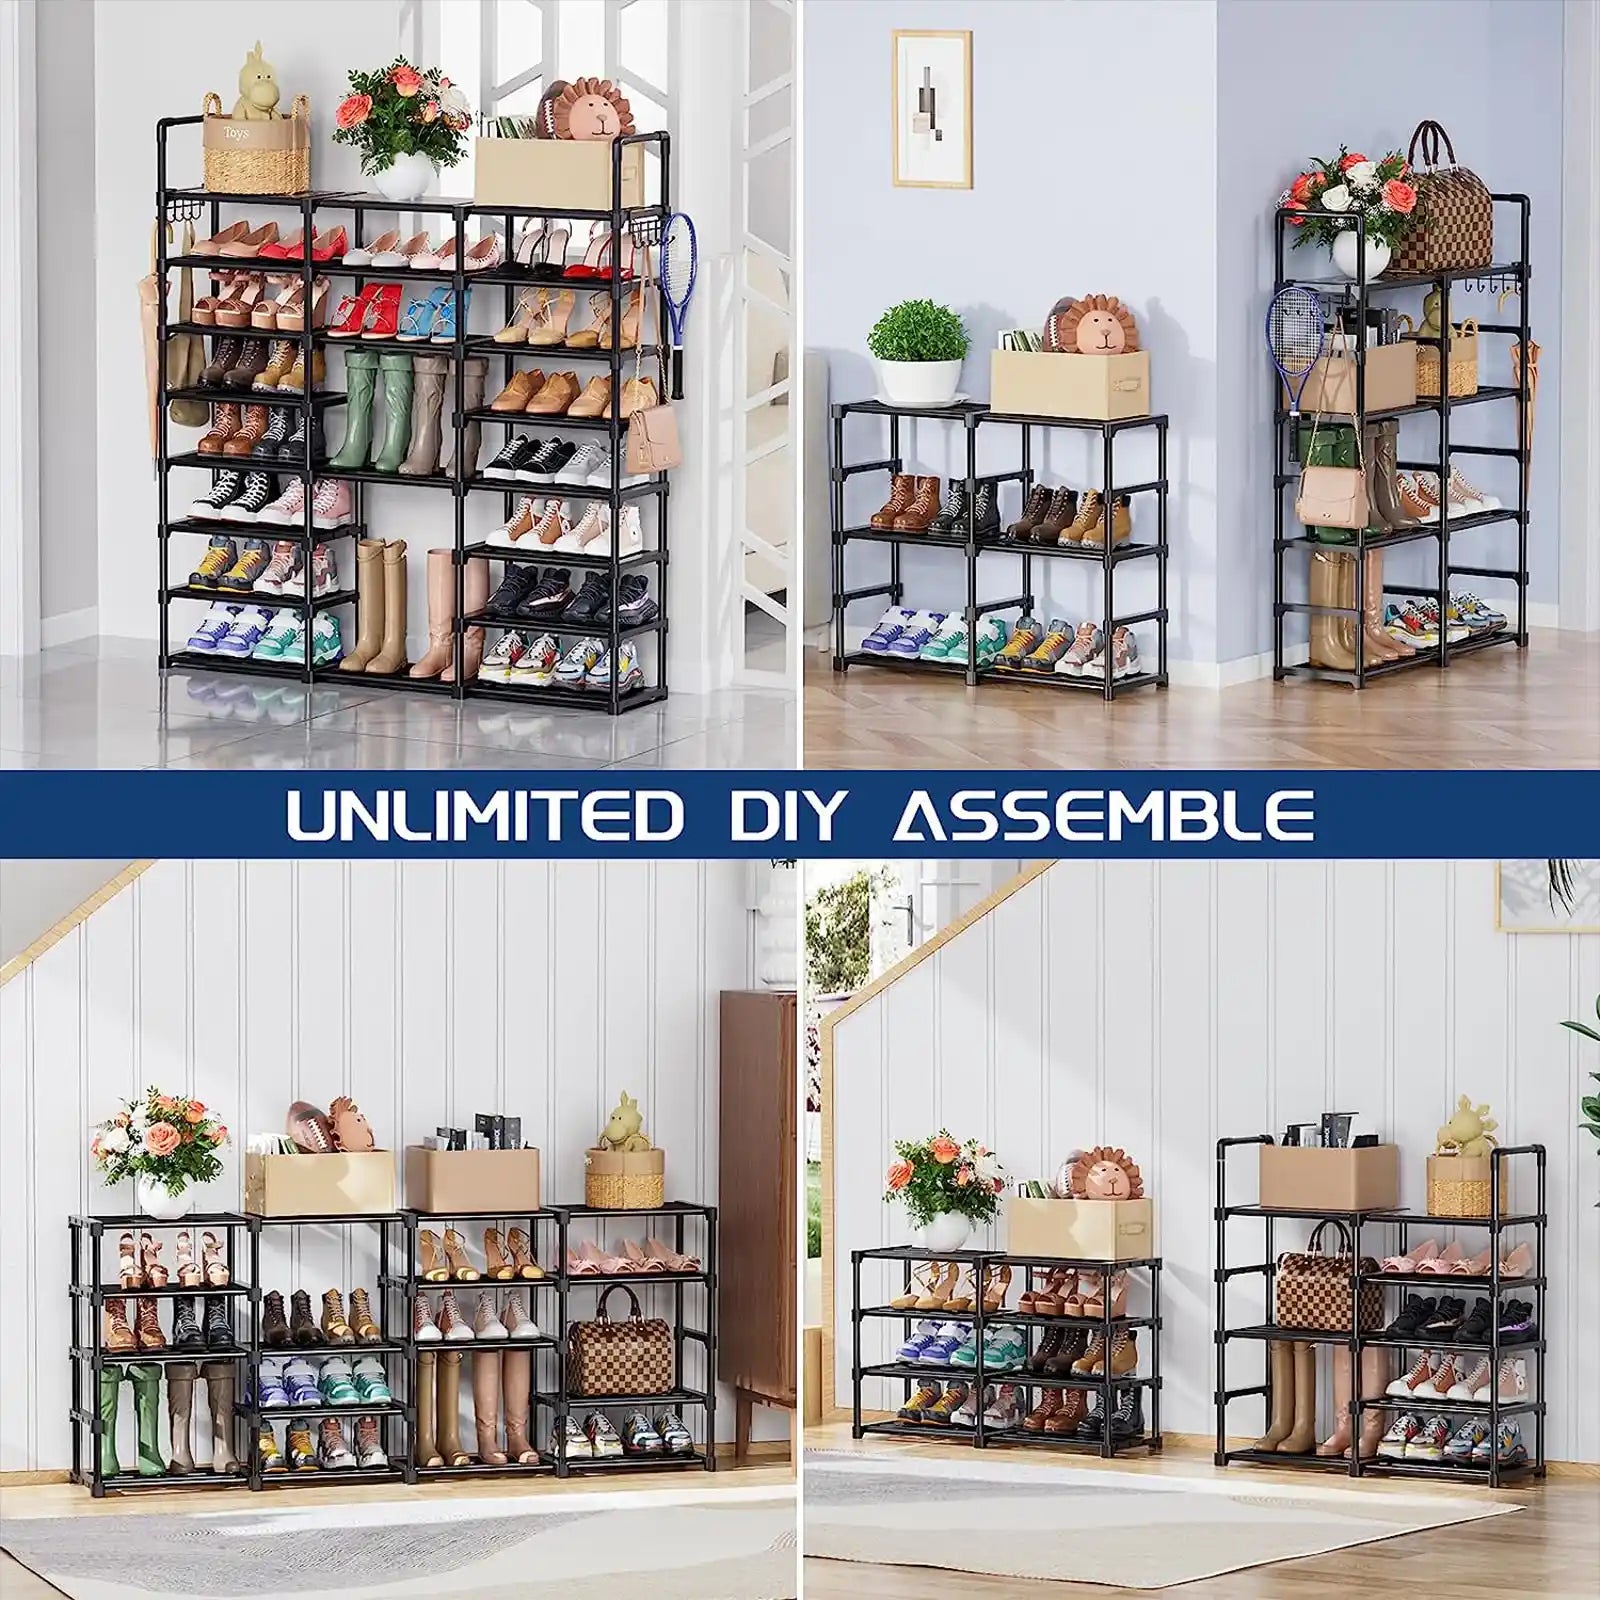 Shoe Cabinet for Entryway, 8-Tier Tall Shoe Shelf Shoes Rack